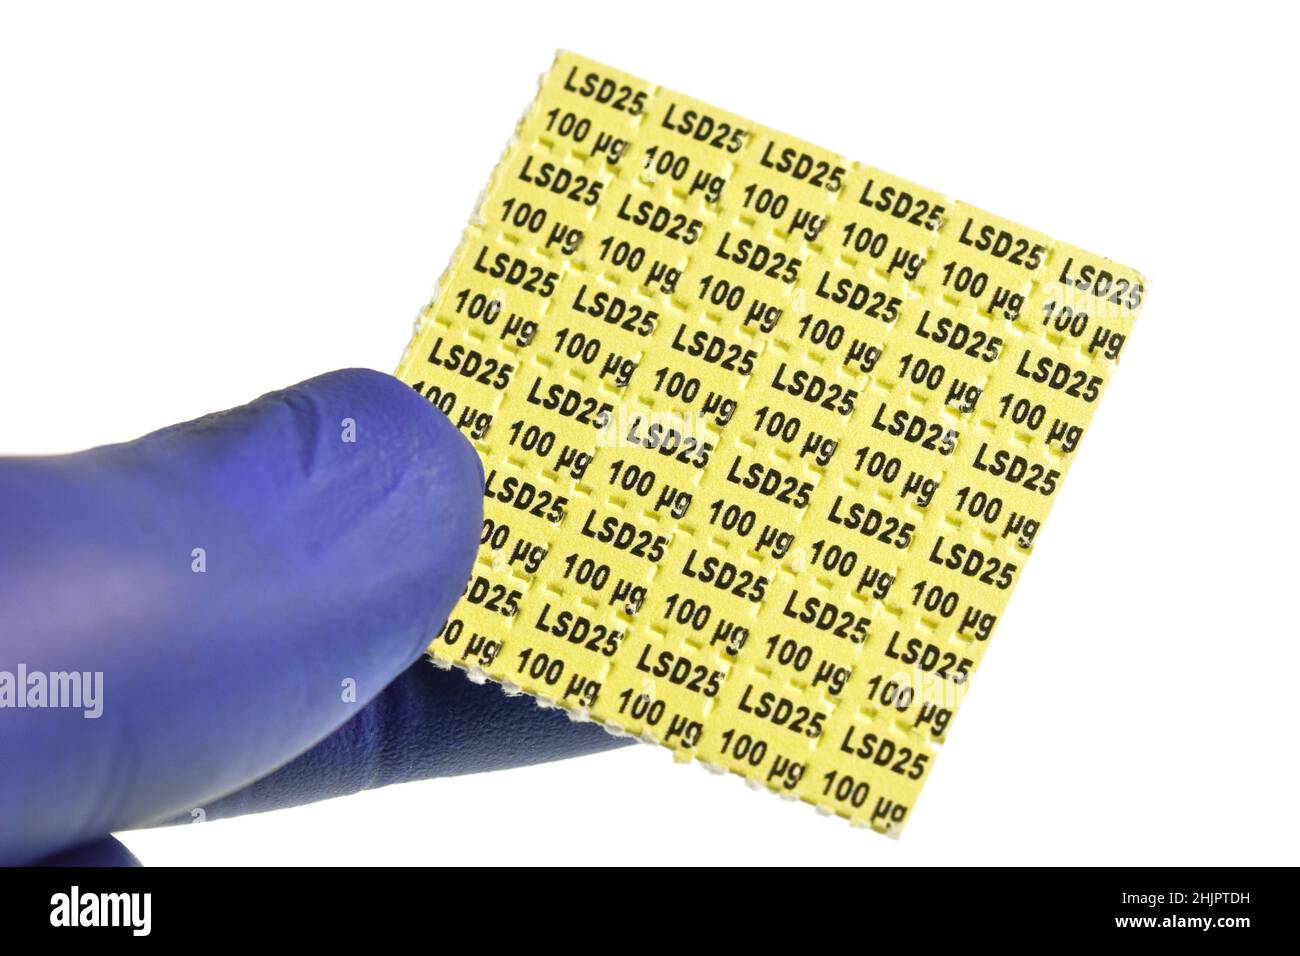 Acid trips, Blotting paper impregnated with the drug L.S.D.- Lysergic acid diethylamide. Stock Photo